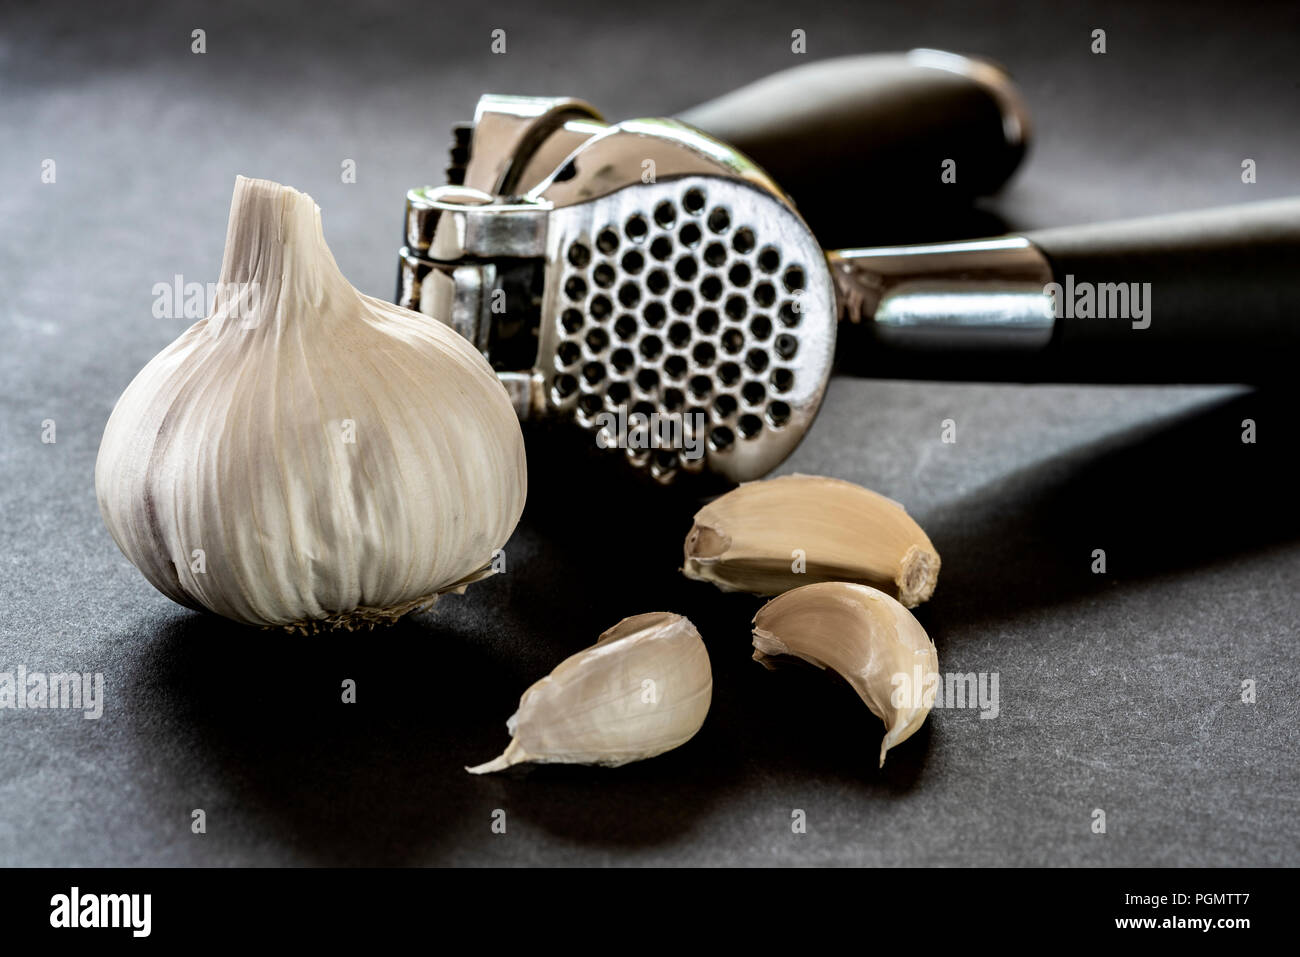 Garlic crusher or press with a bulb and cloves. Stock Photo